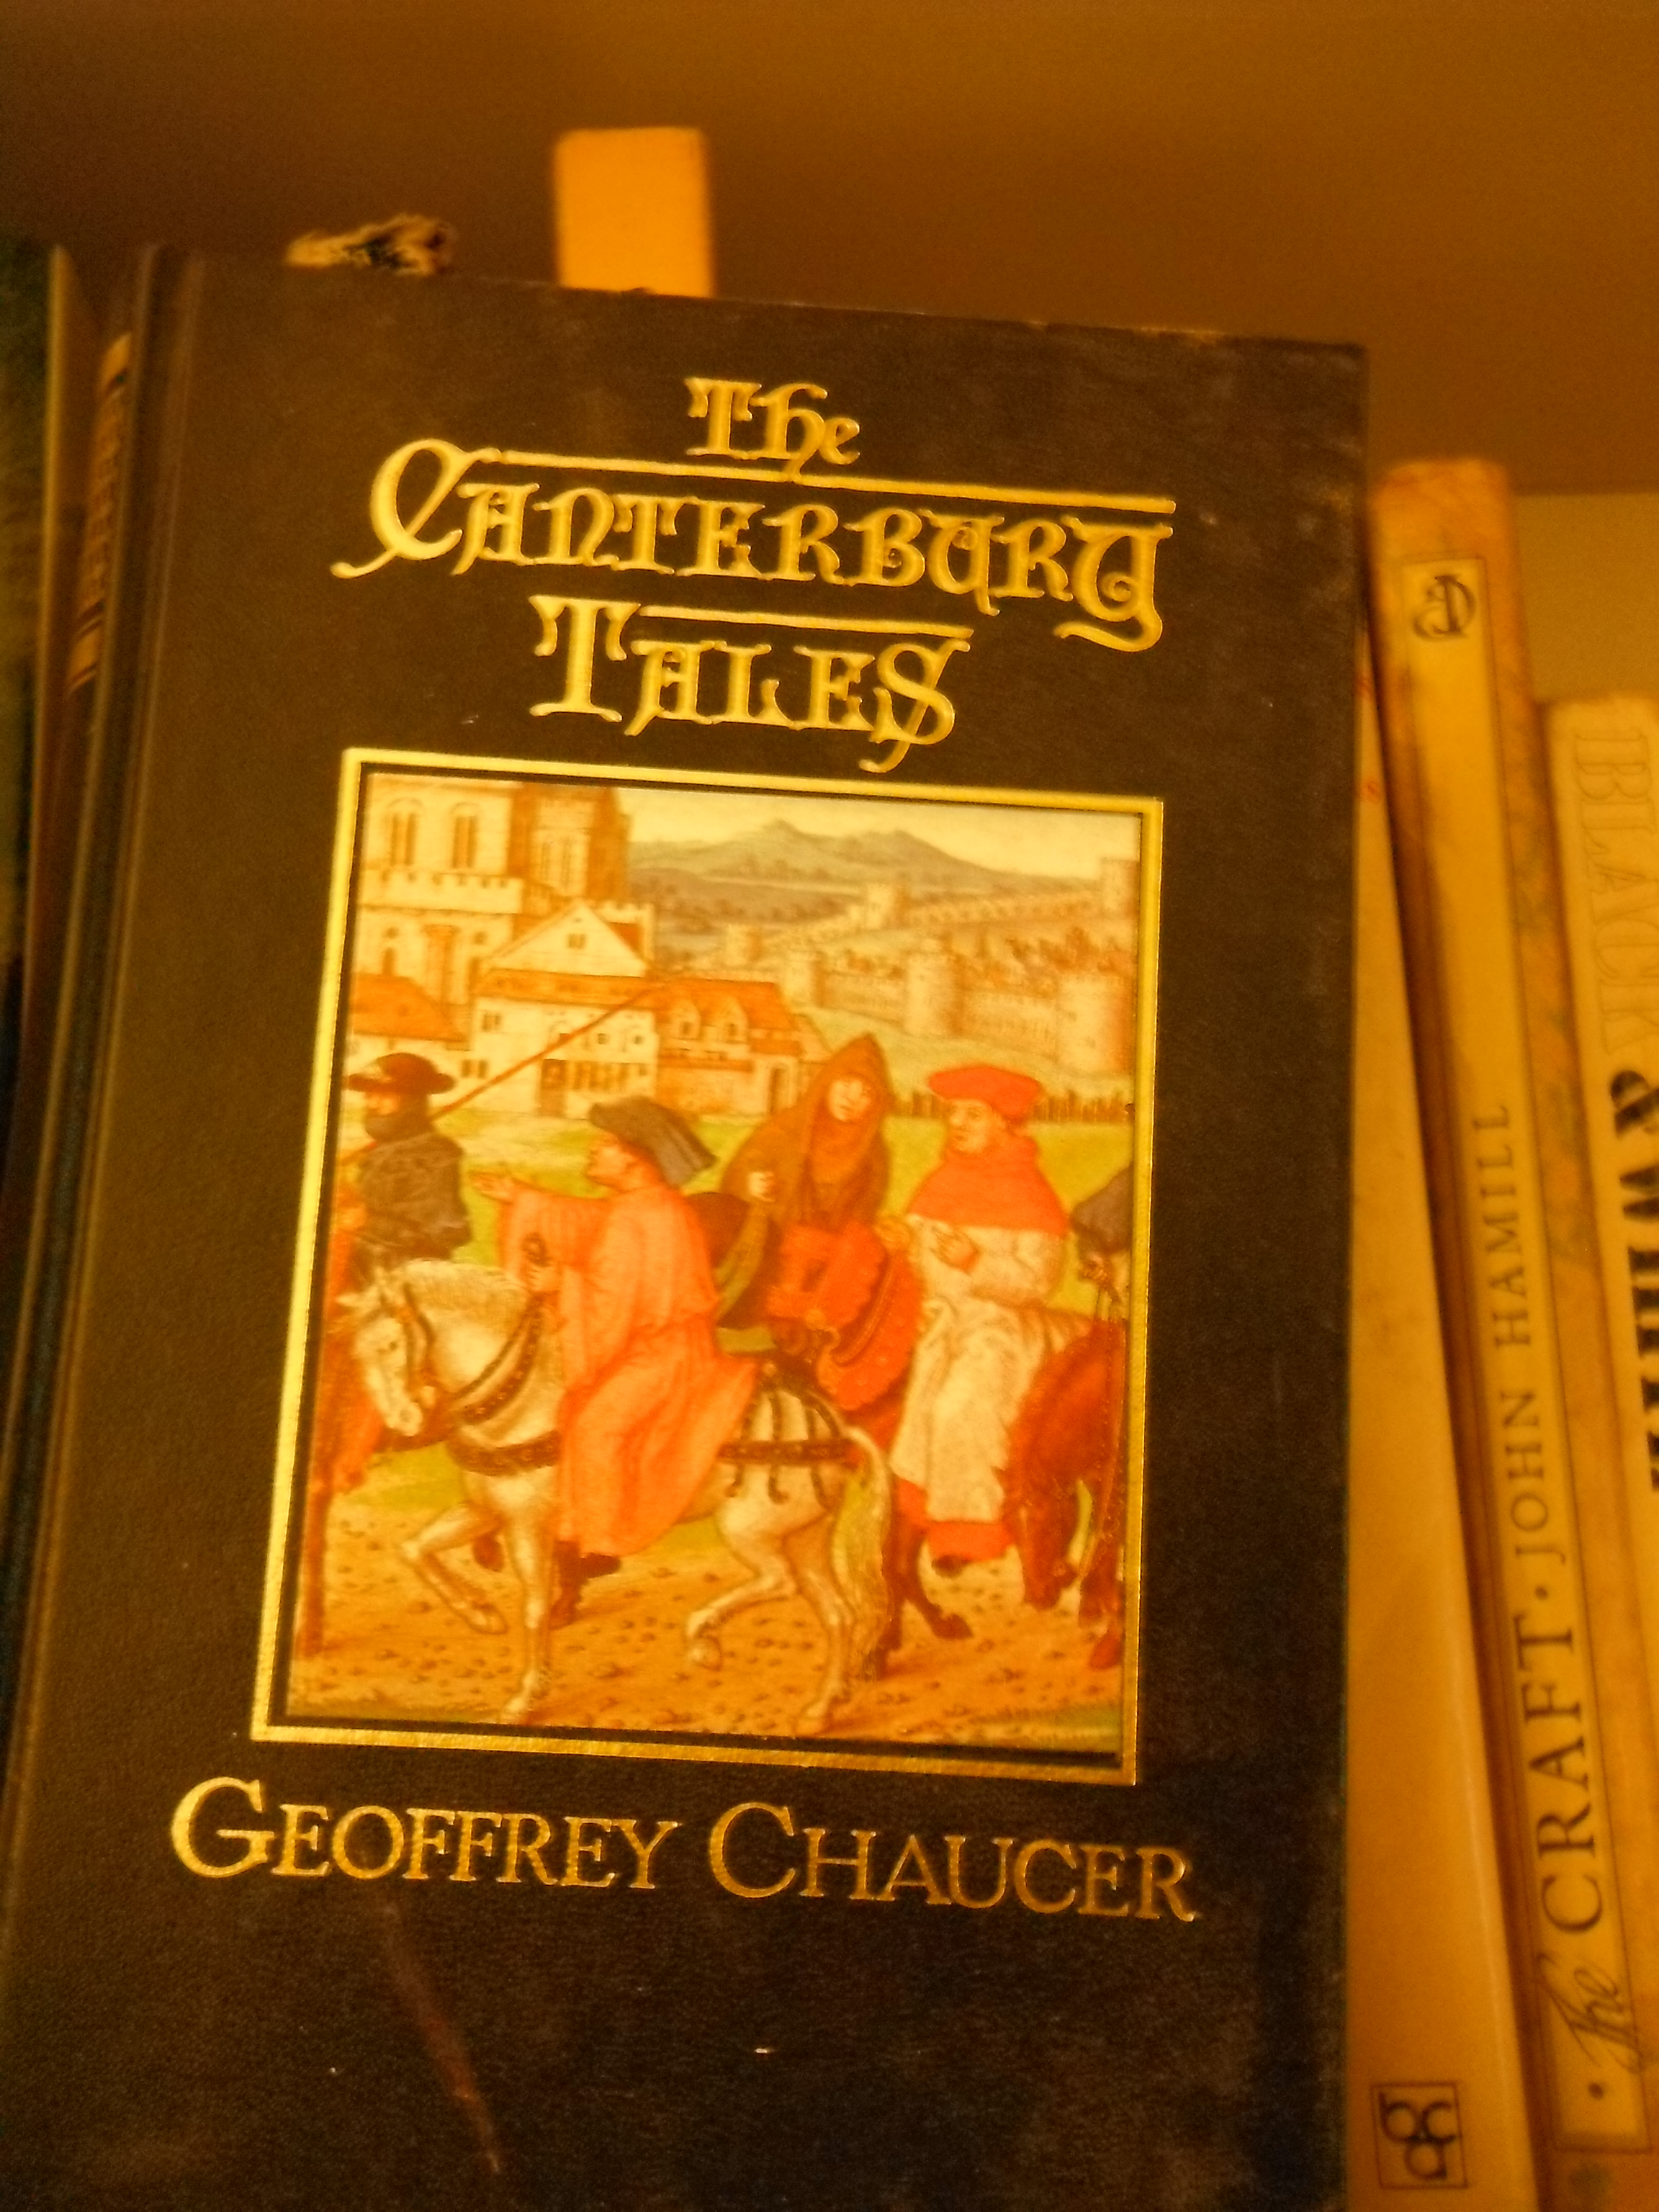 Photo taken by me – Front cover art to the book of Chaucer’s Canterbury Tales